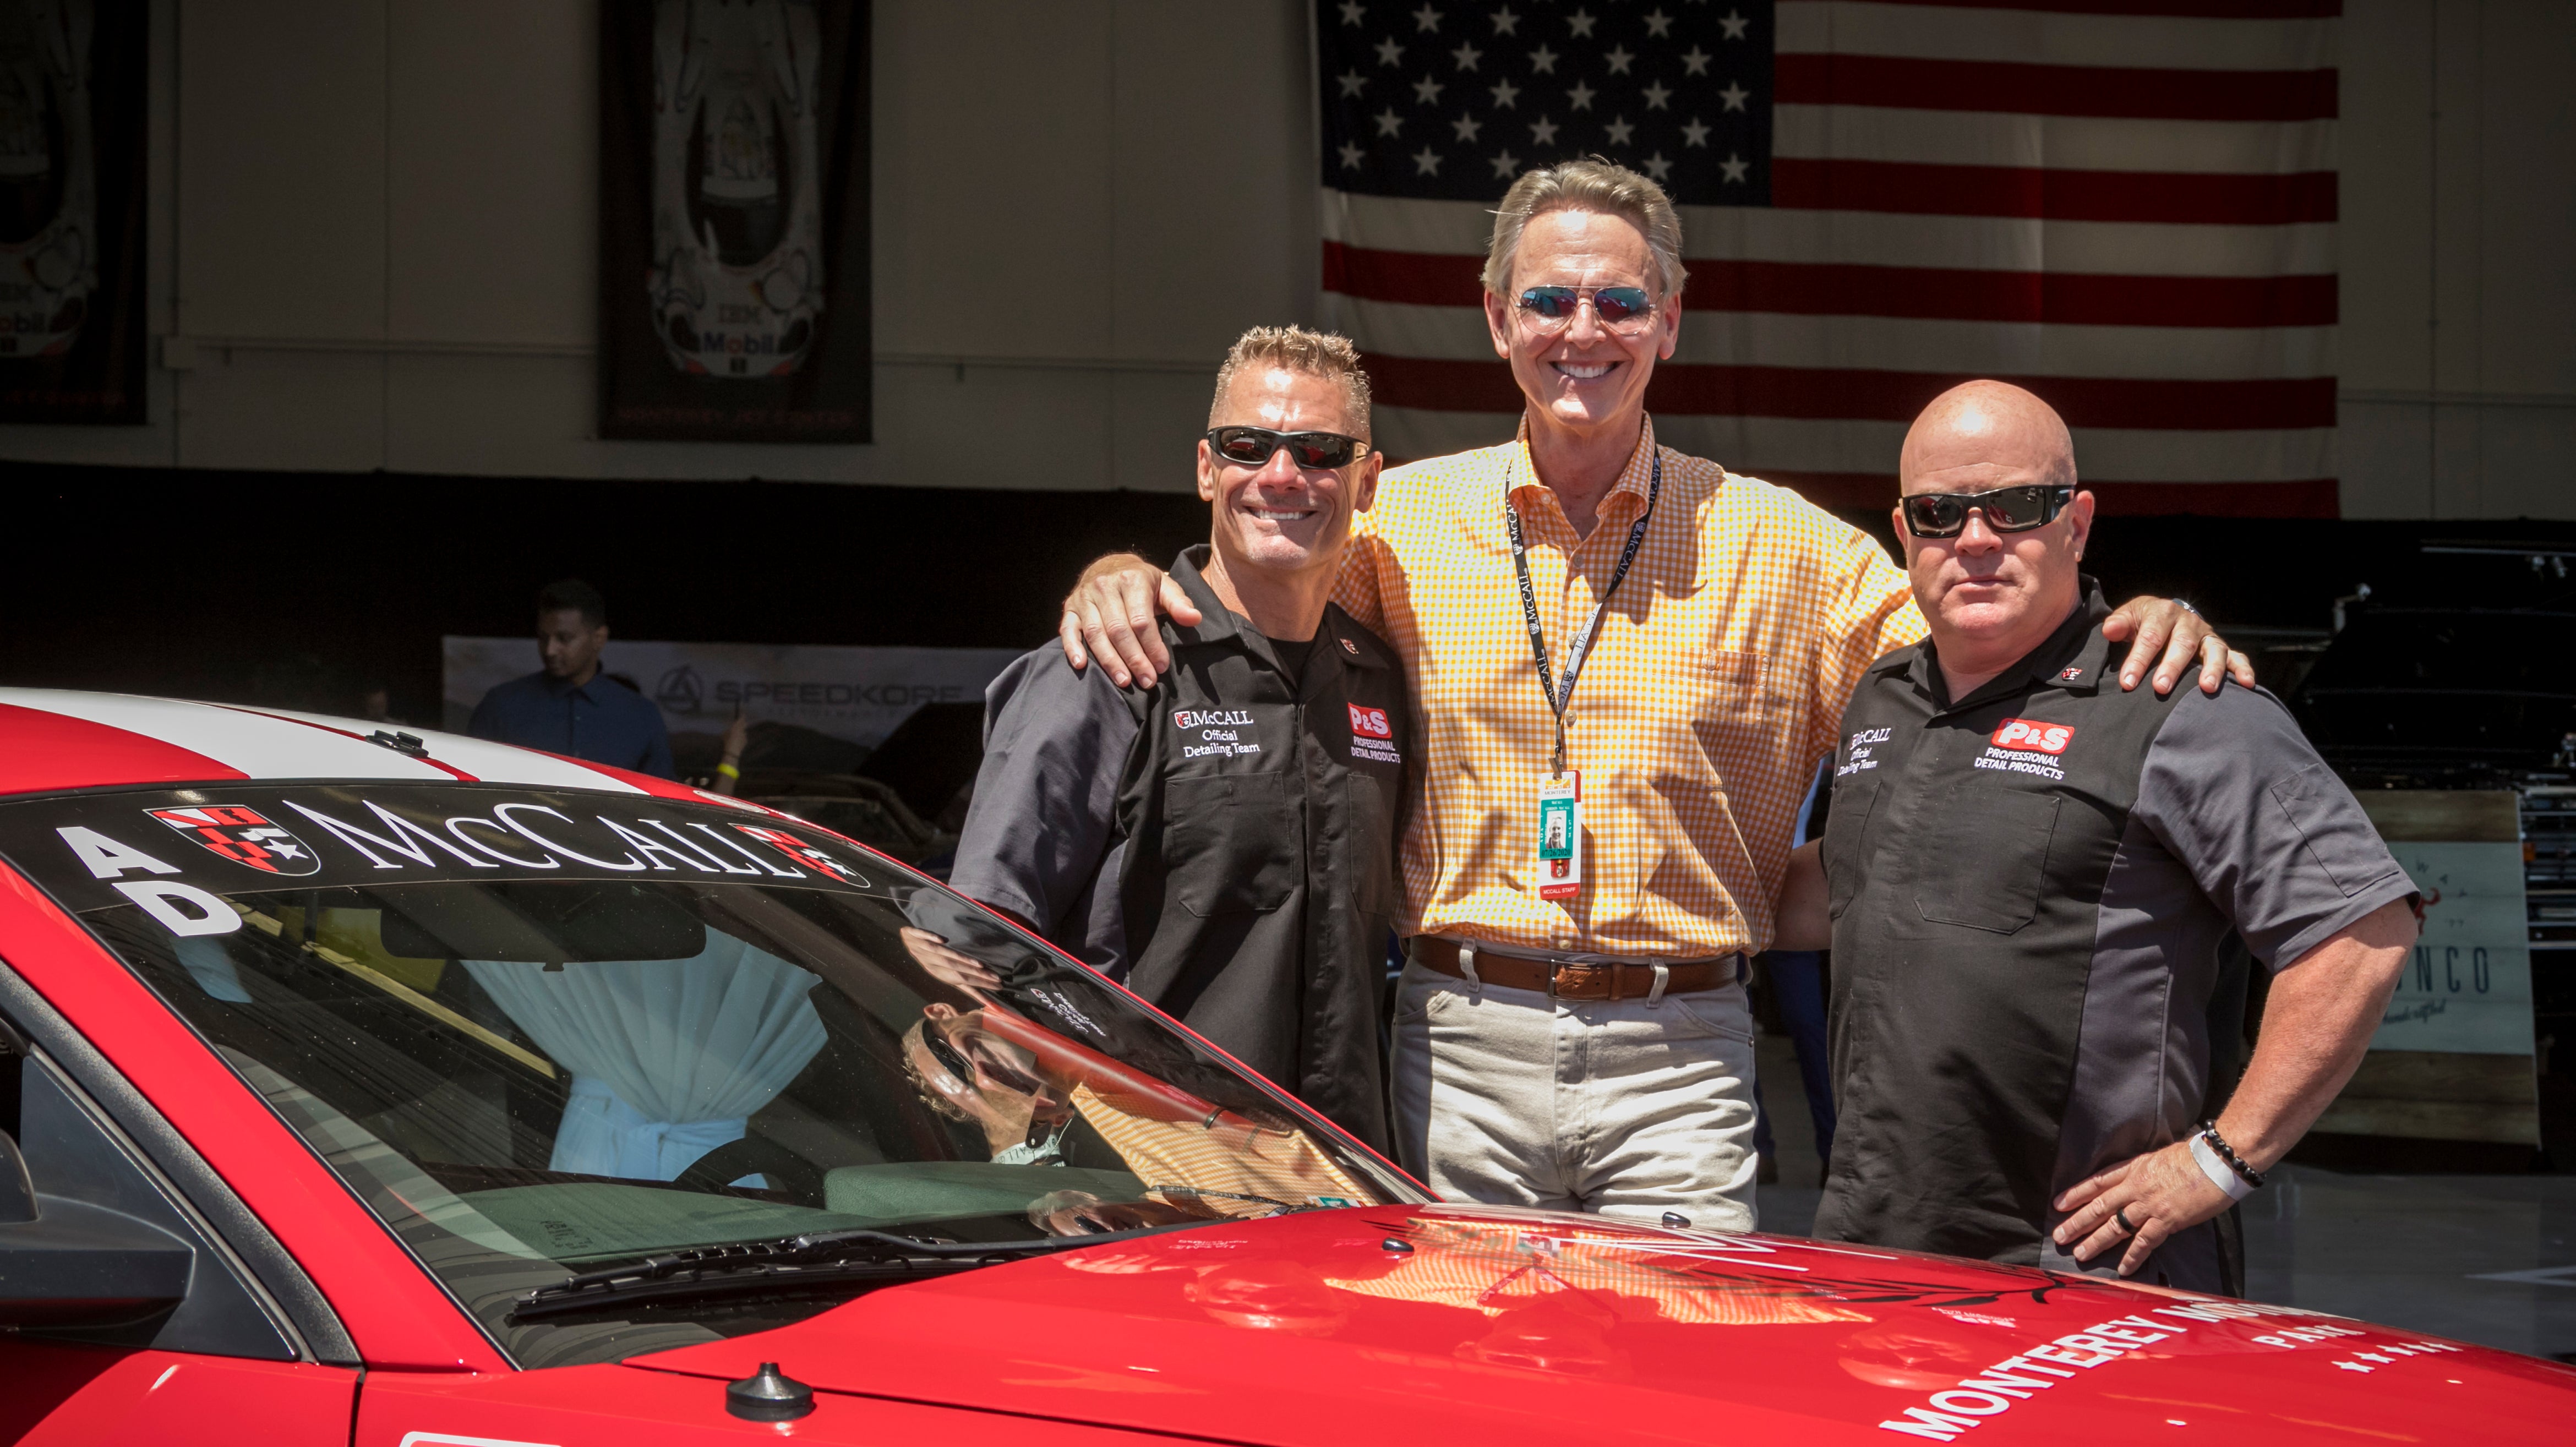 The Situation Room with Bob Phillips: Monterey Car Week & Gordon McCall